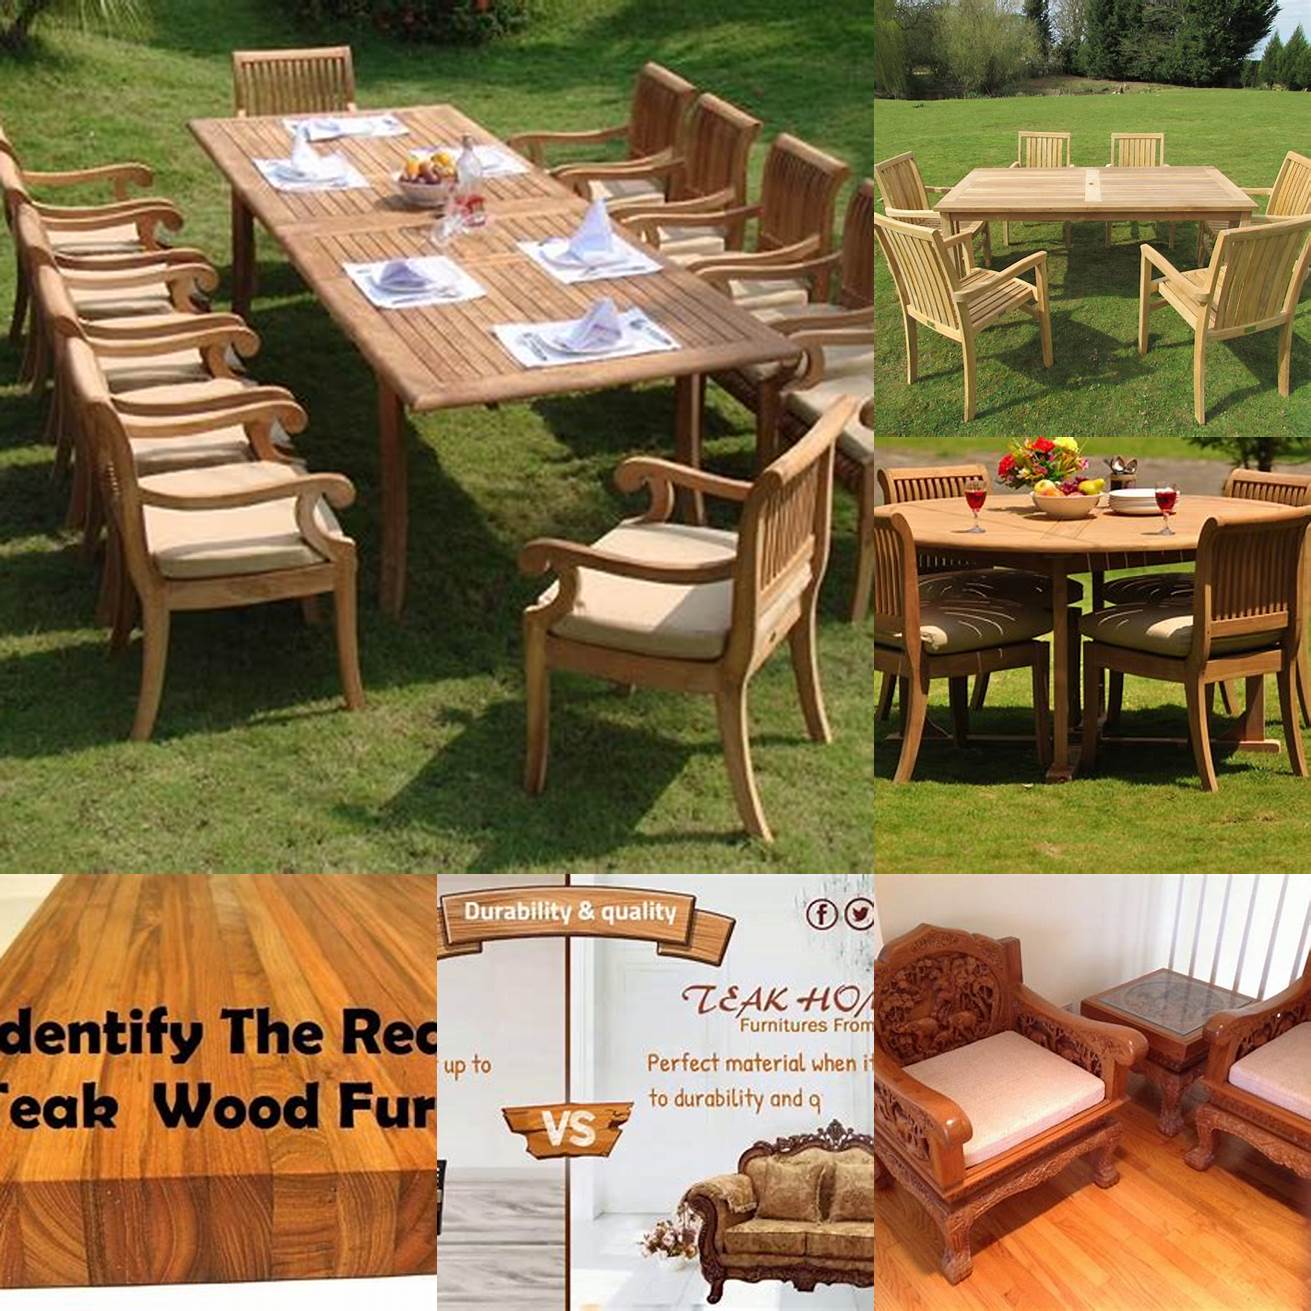 A comparison of different teak furniture styles